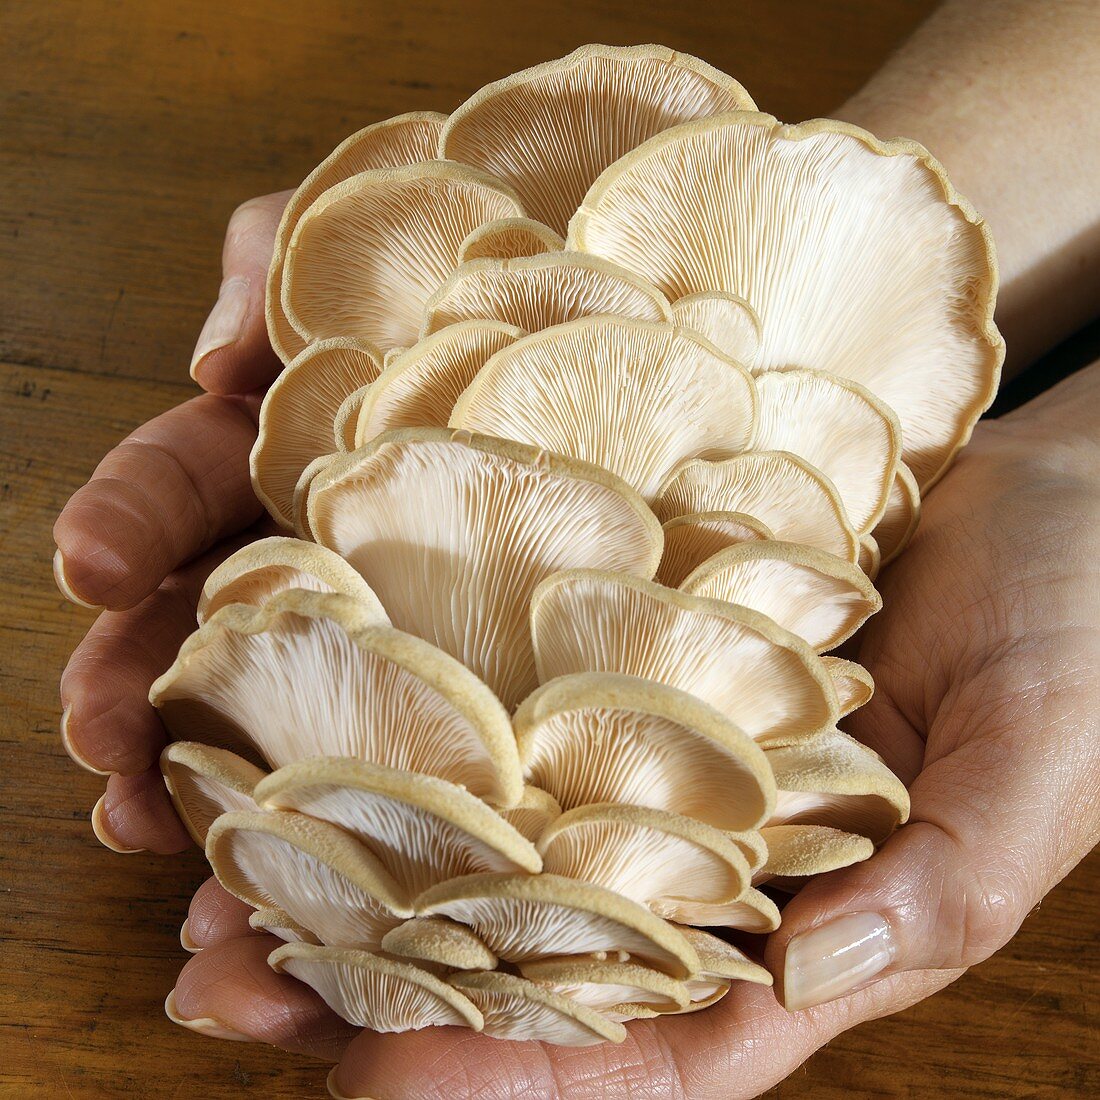 Hands Holding Pink Oyster Mushrooms